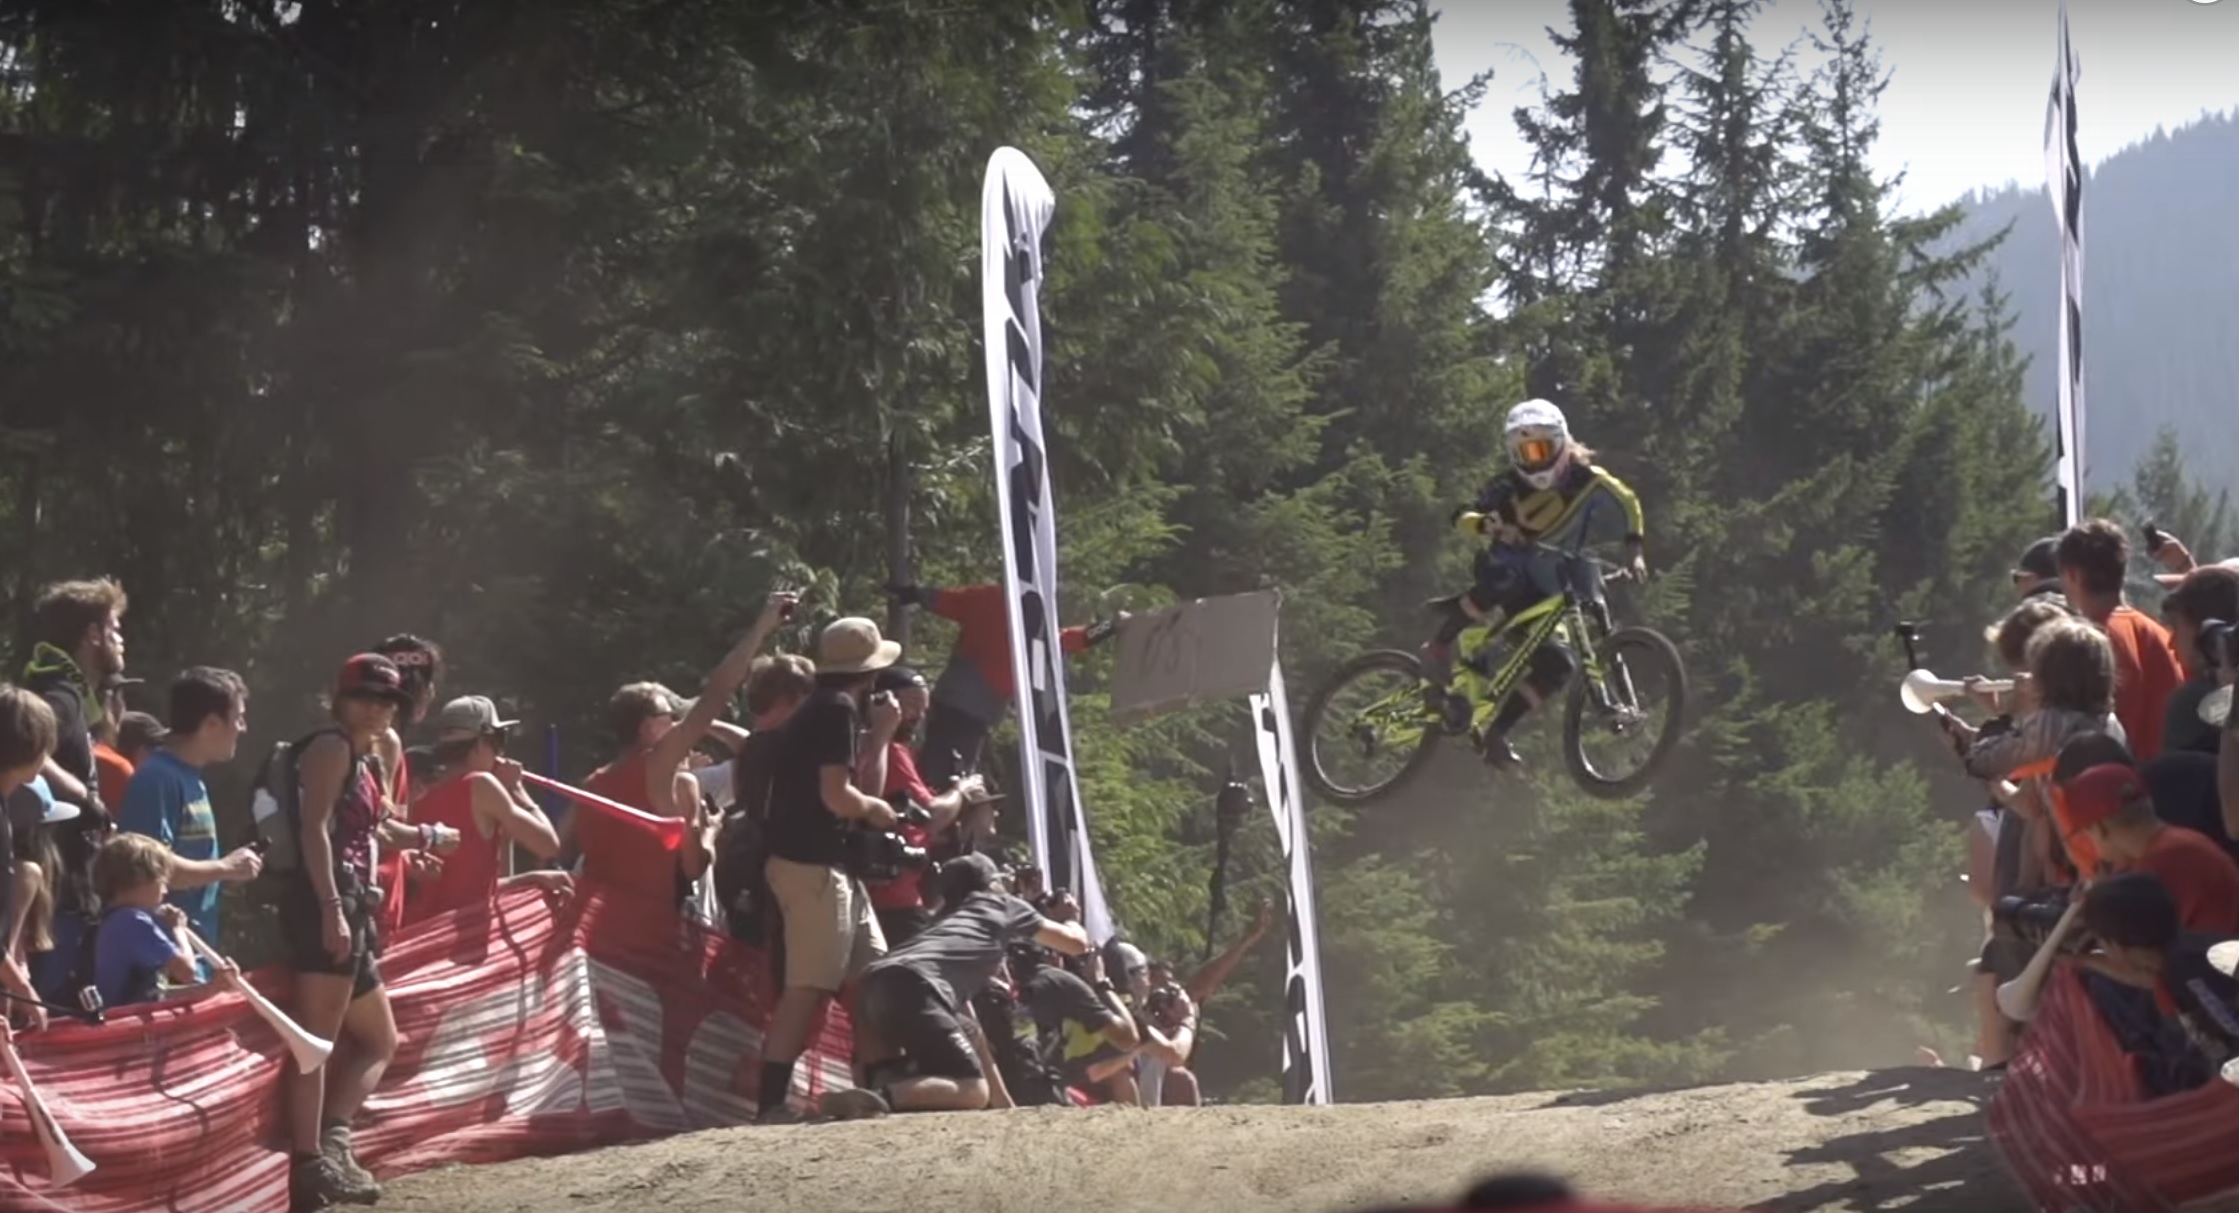 Must See: The Queen Of Crankworx and female athletes ripping their way to the top